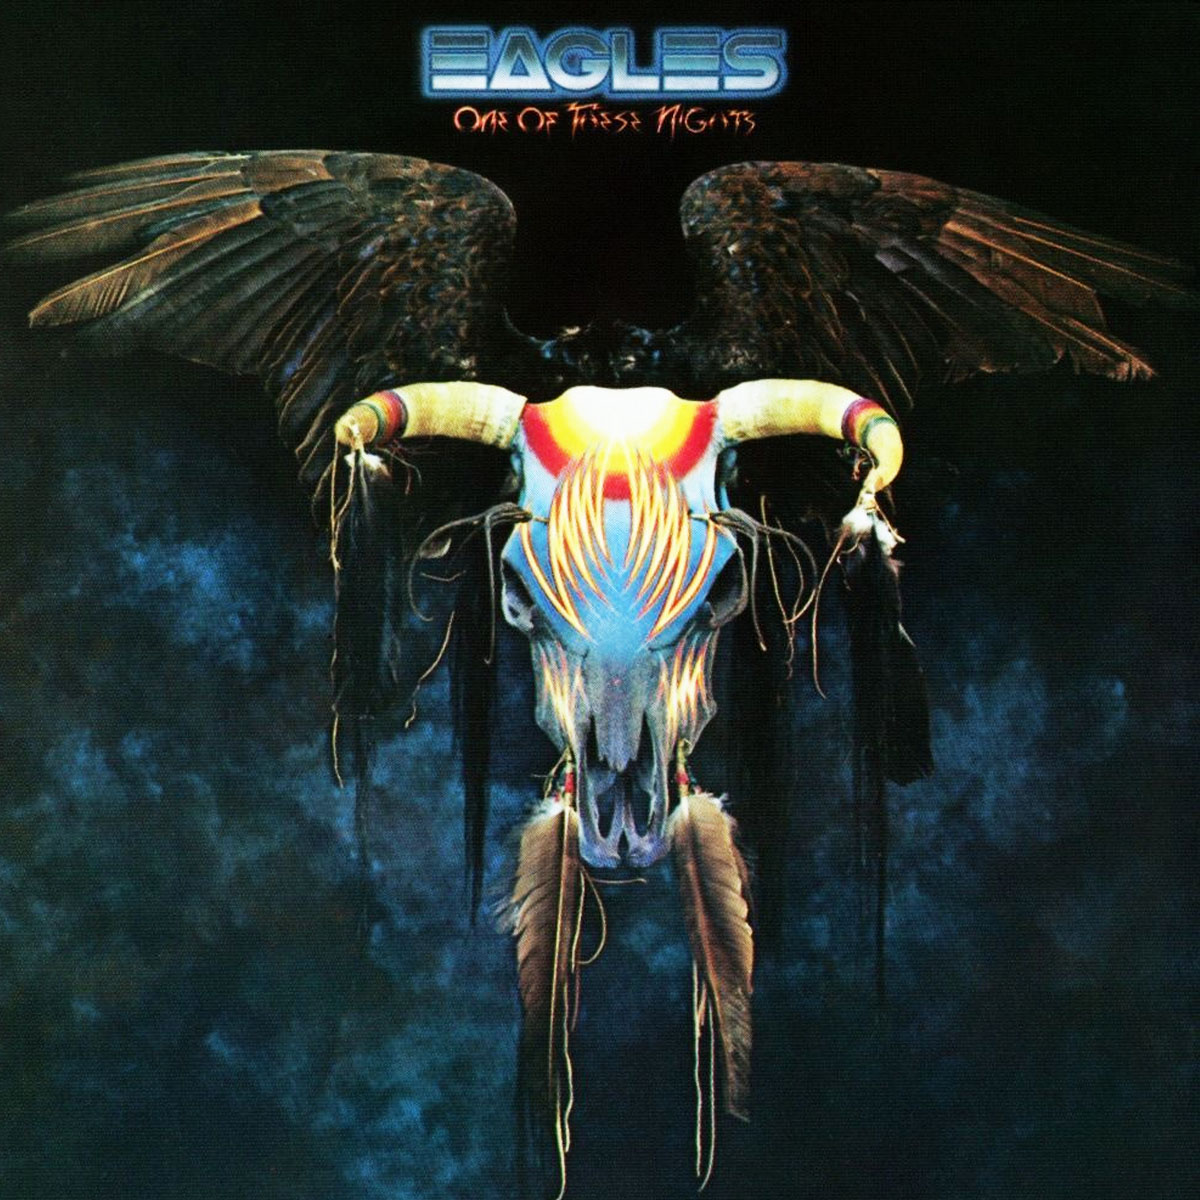 One of These Nights" (1975) de The Eagles